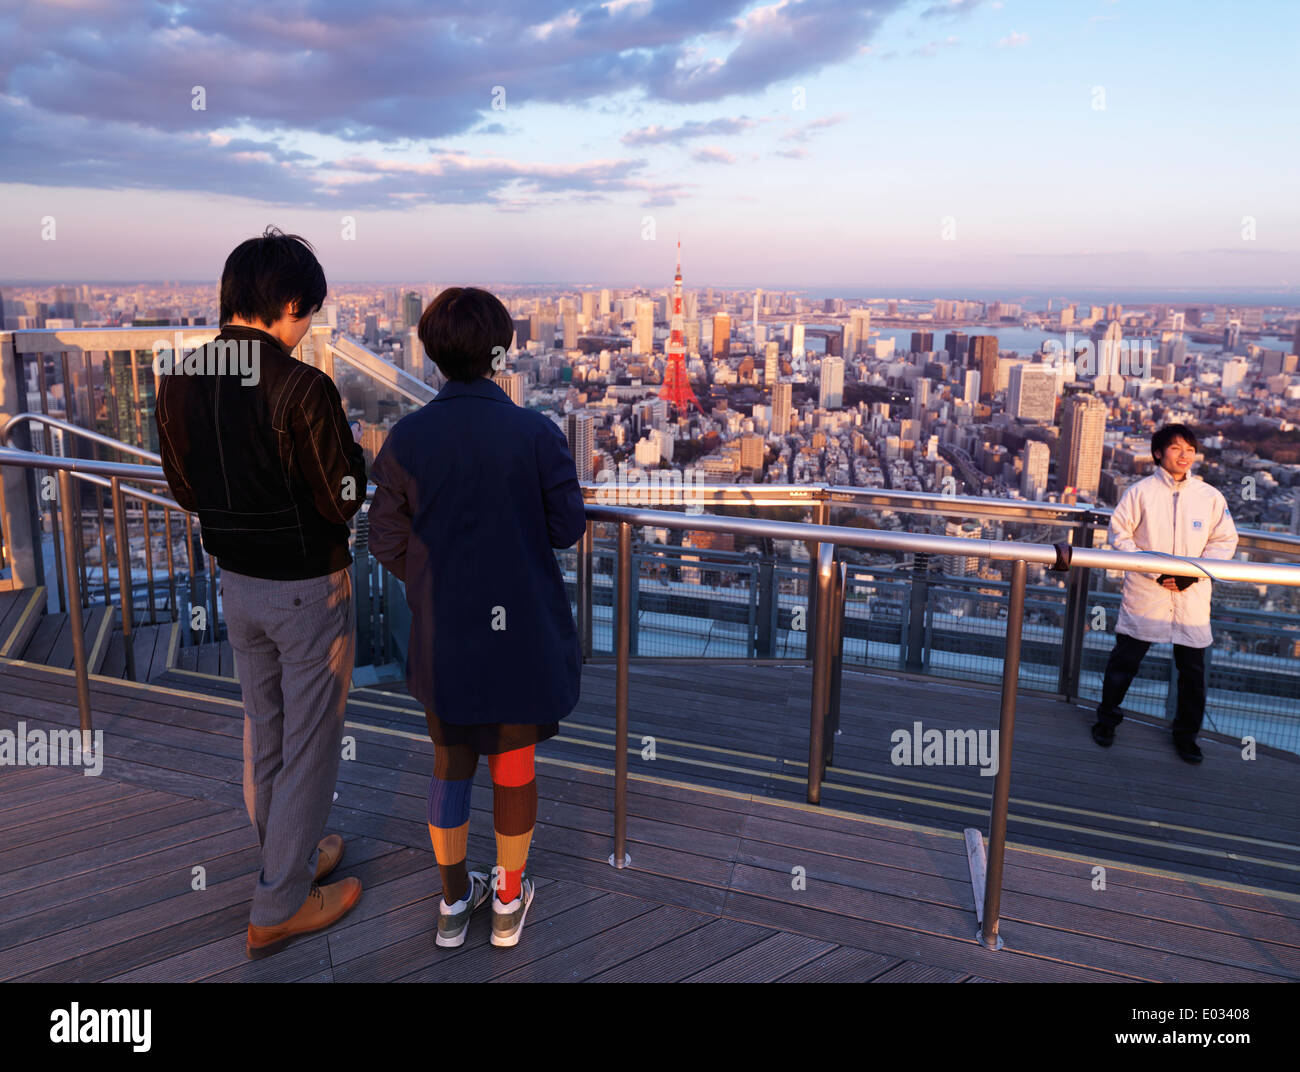 License available at MaximImages.com - People at observation deck of Mori Tower. Roppongi Hills, Tokyo, Japan. Stock Photo